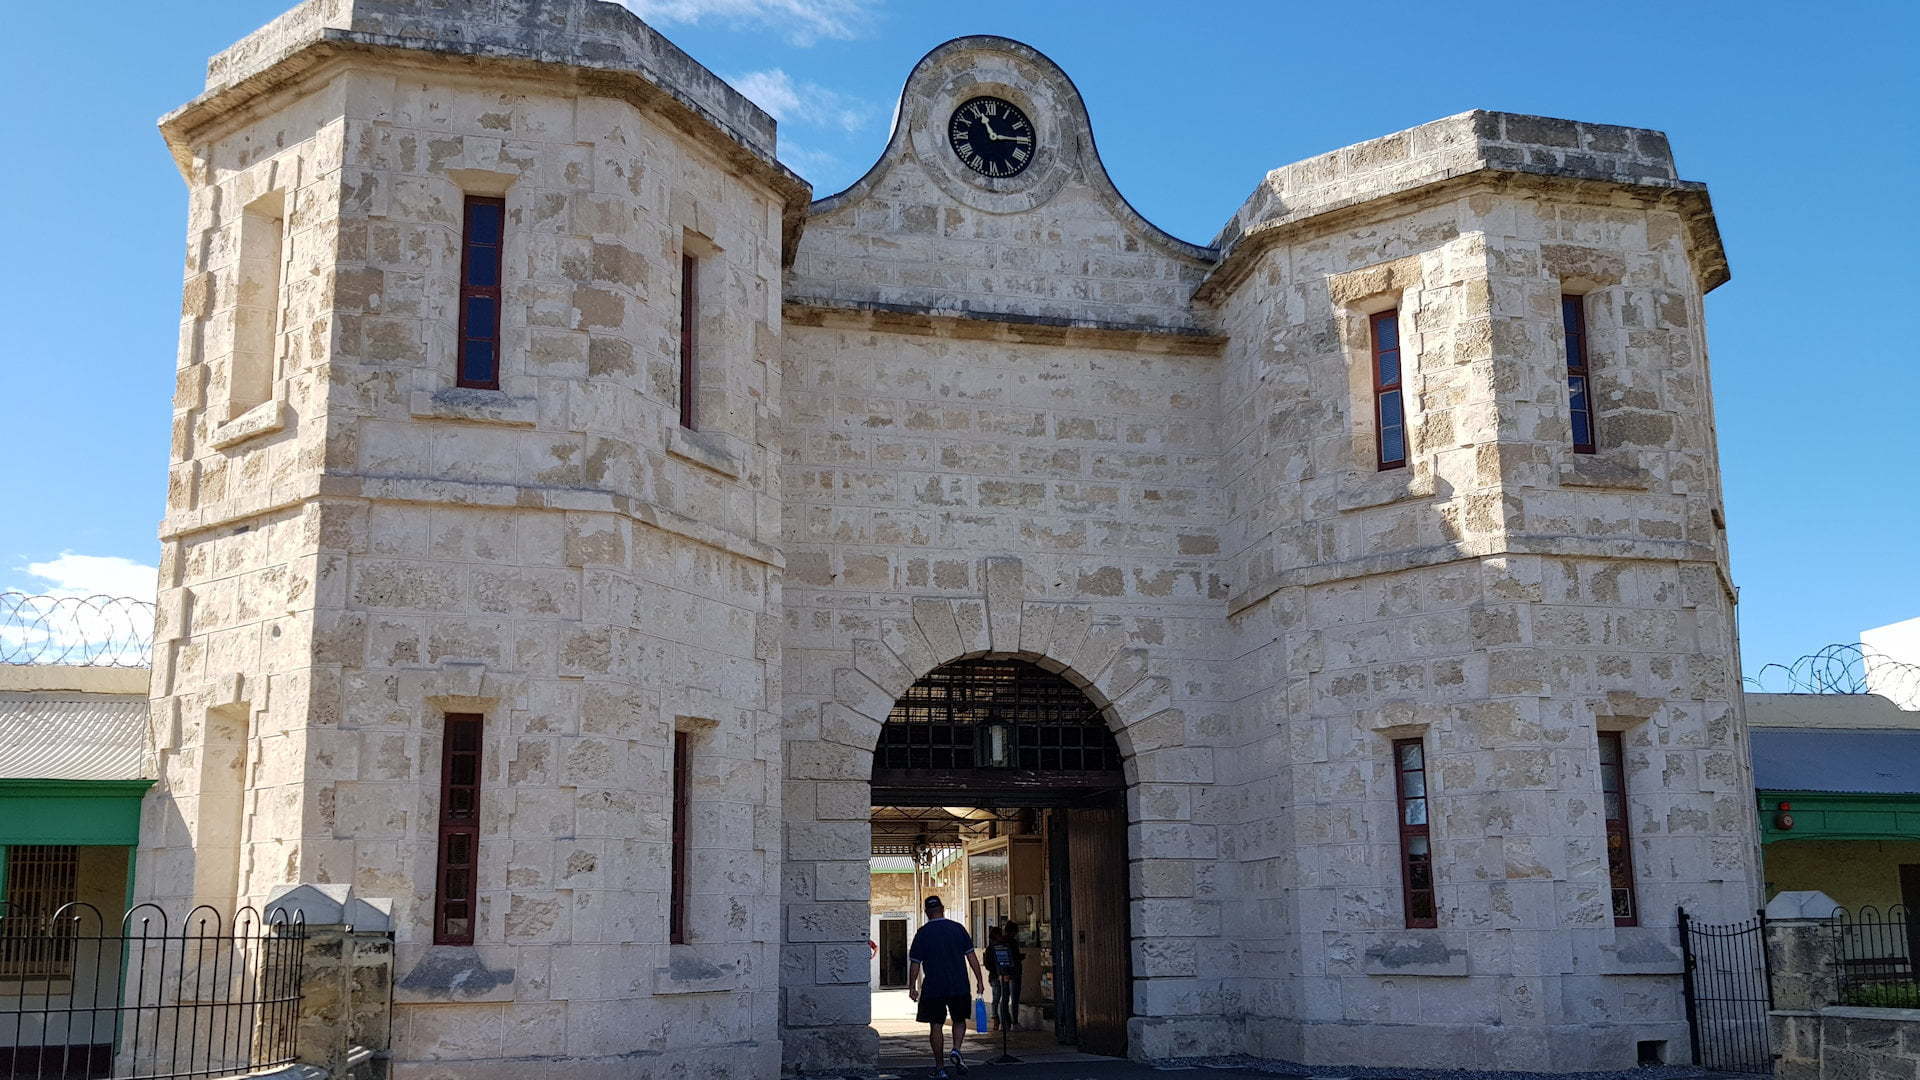 Entrance arch to the Fremantle Prison, made of stone with a central arch opening with a clock at the top and flanked by two octagonal towers